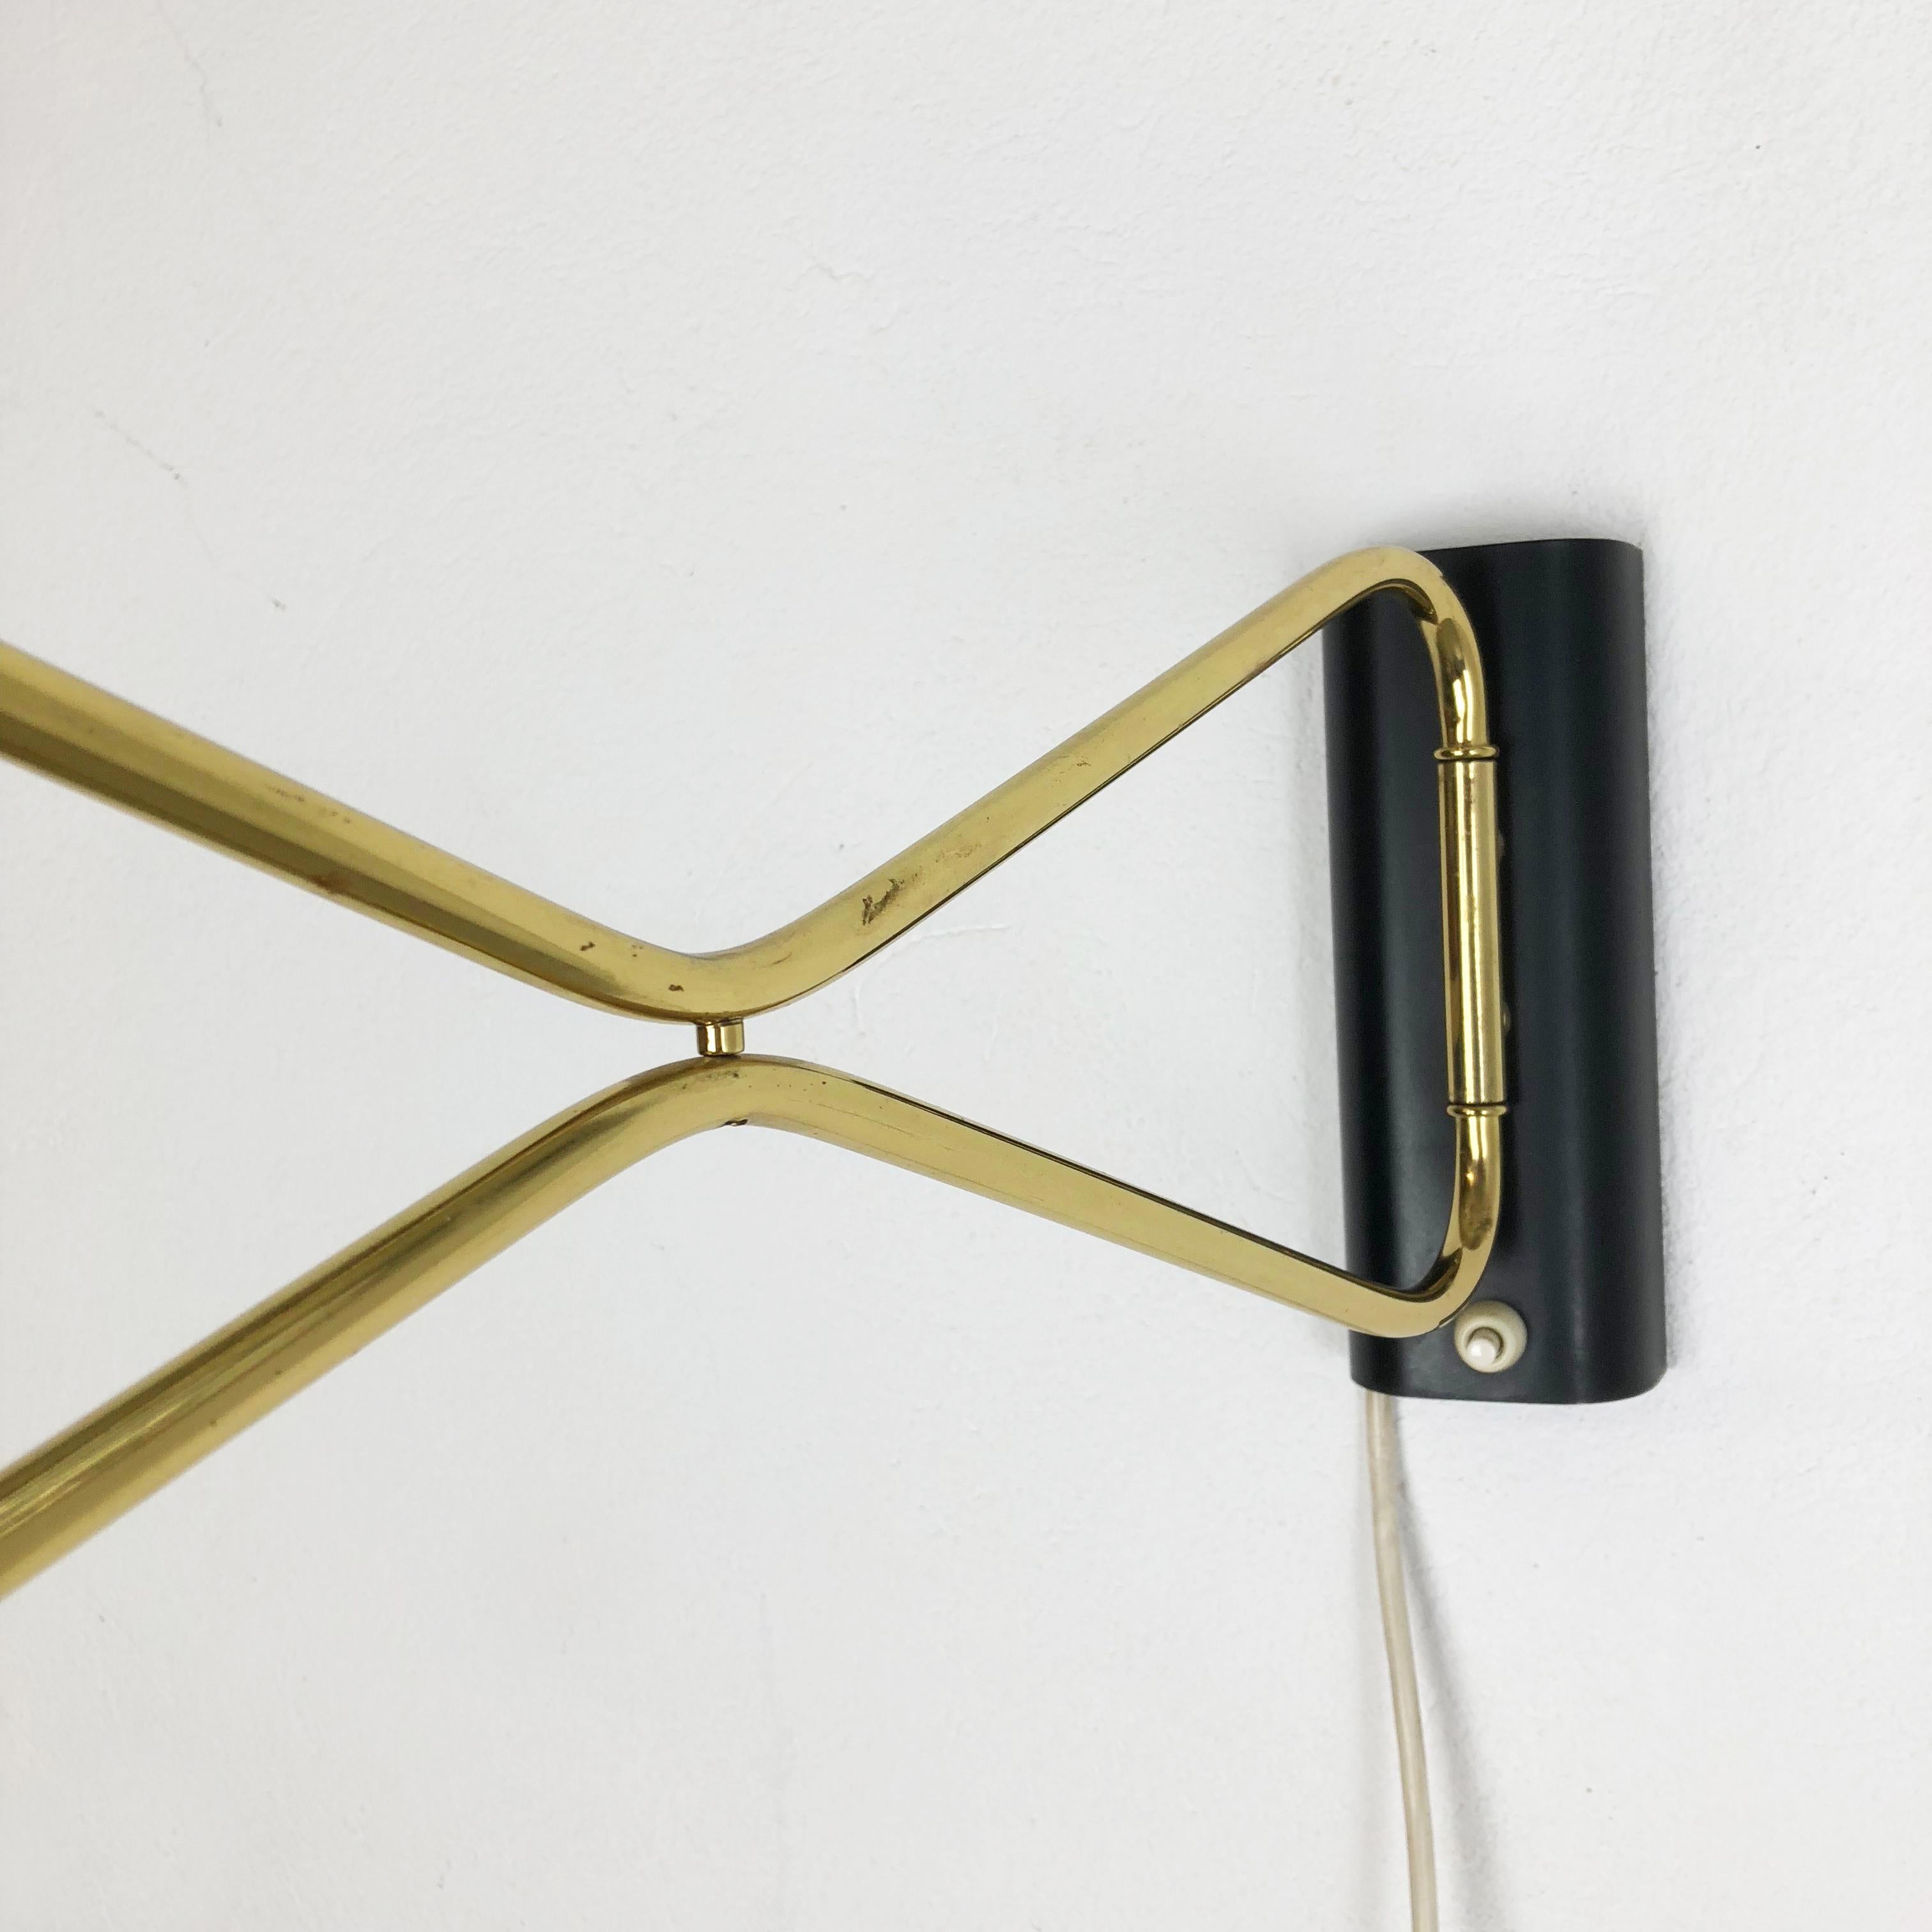 Original Modernist 1950s Brass Metal Swing Wall Light Made by Cosack, Germany 4